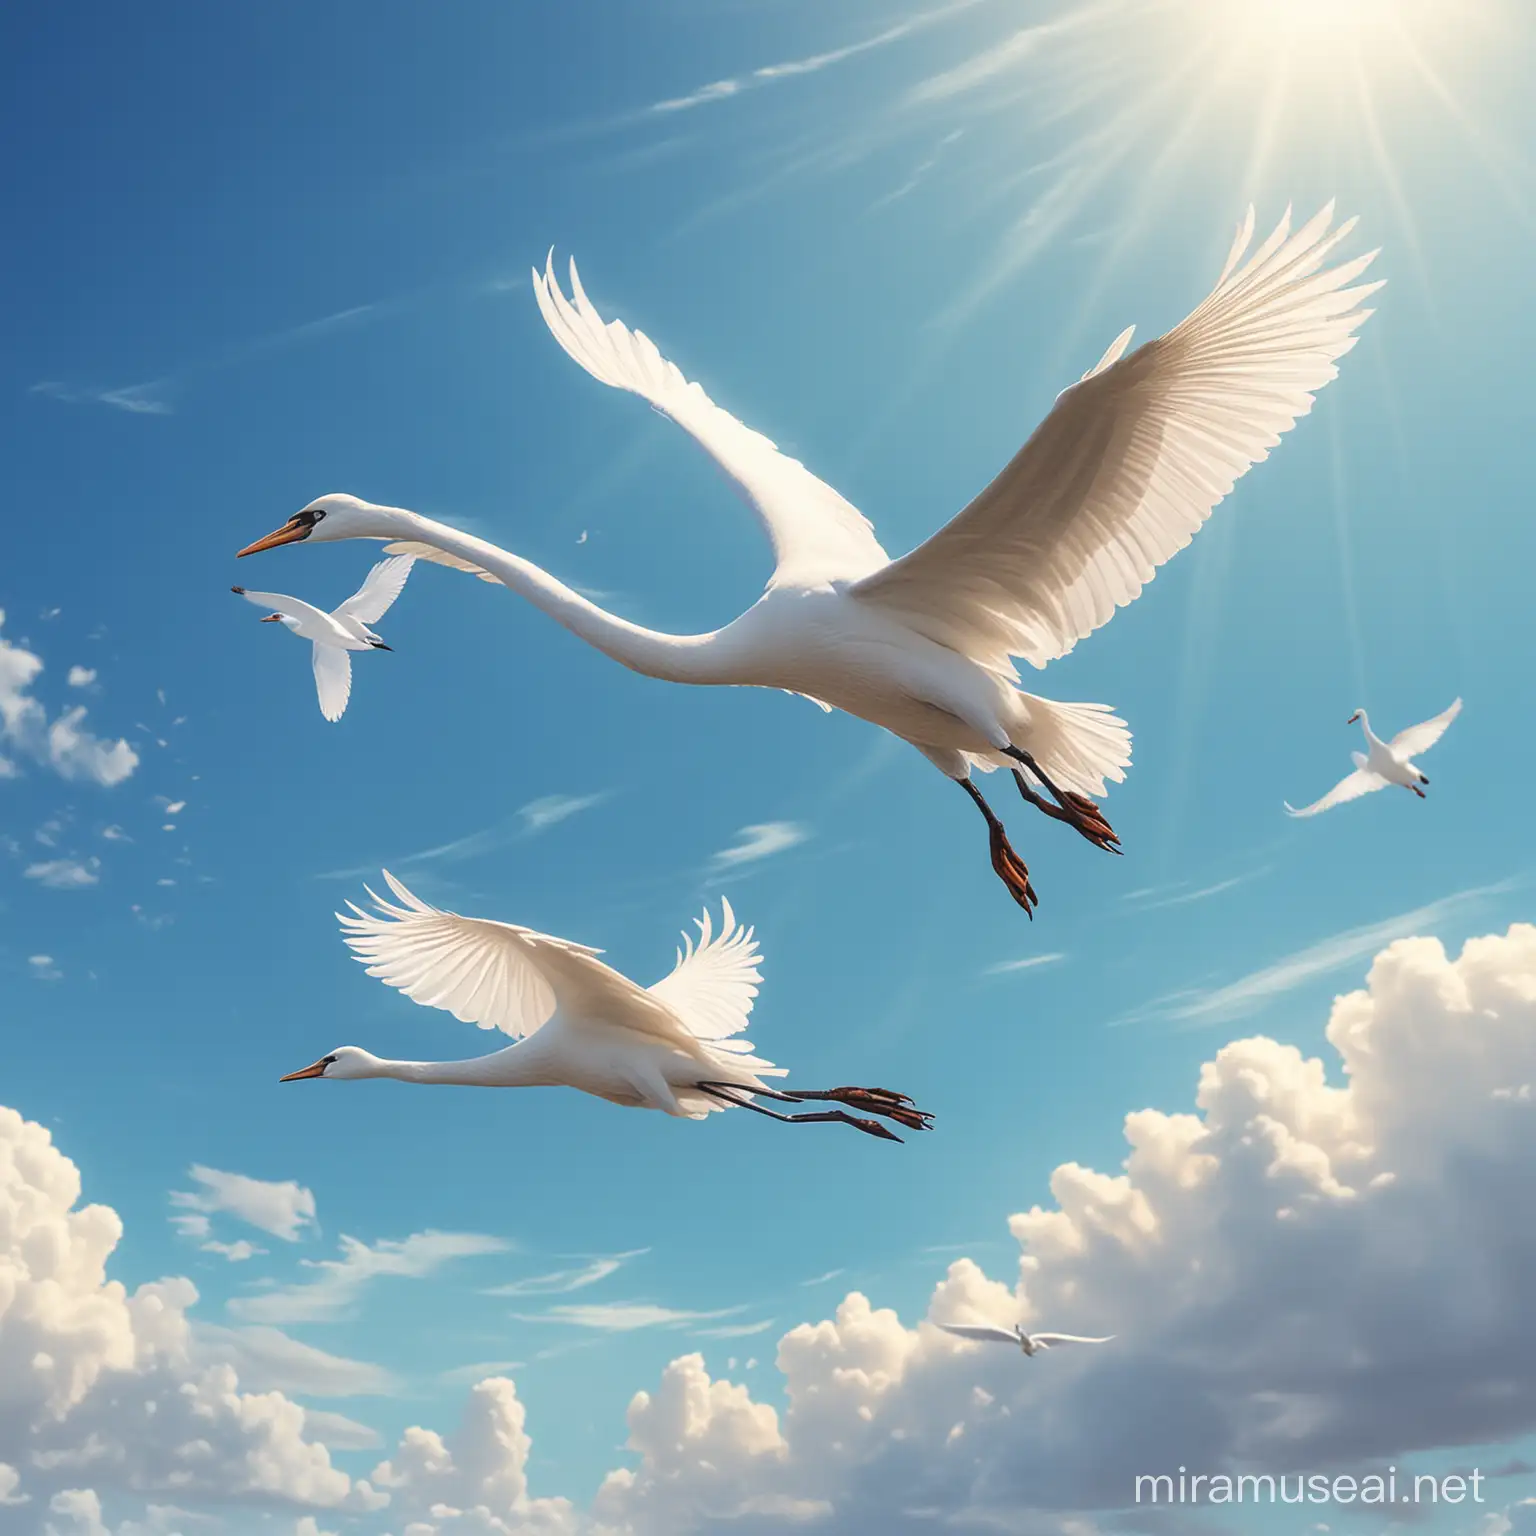 Egret and a swan are flying in the blue sky ,disney pixar style